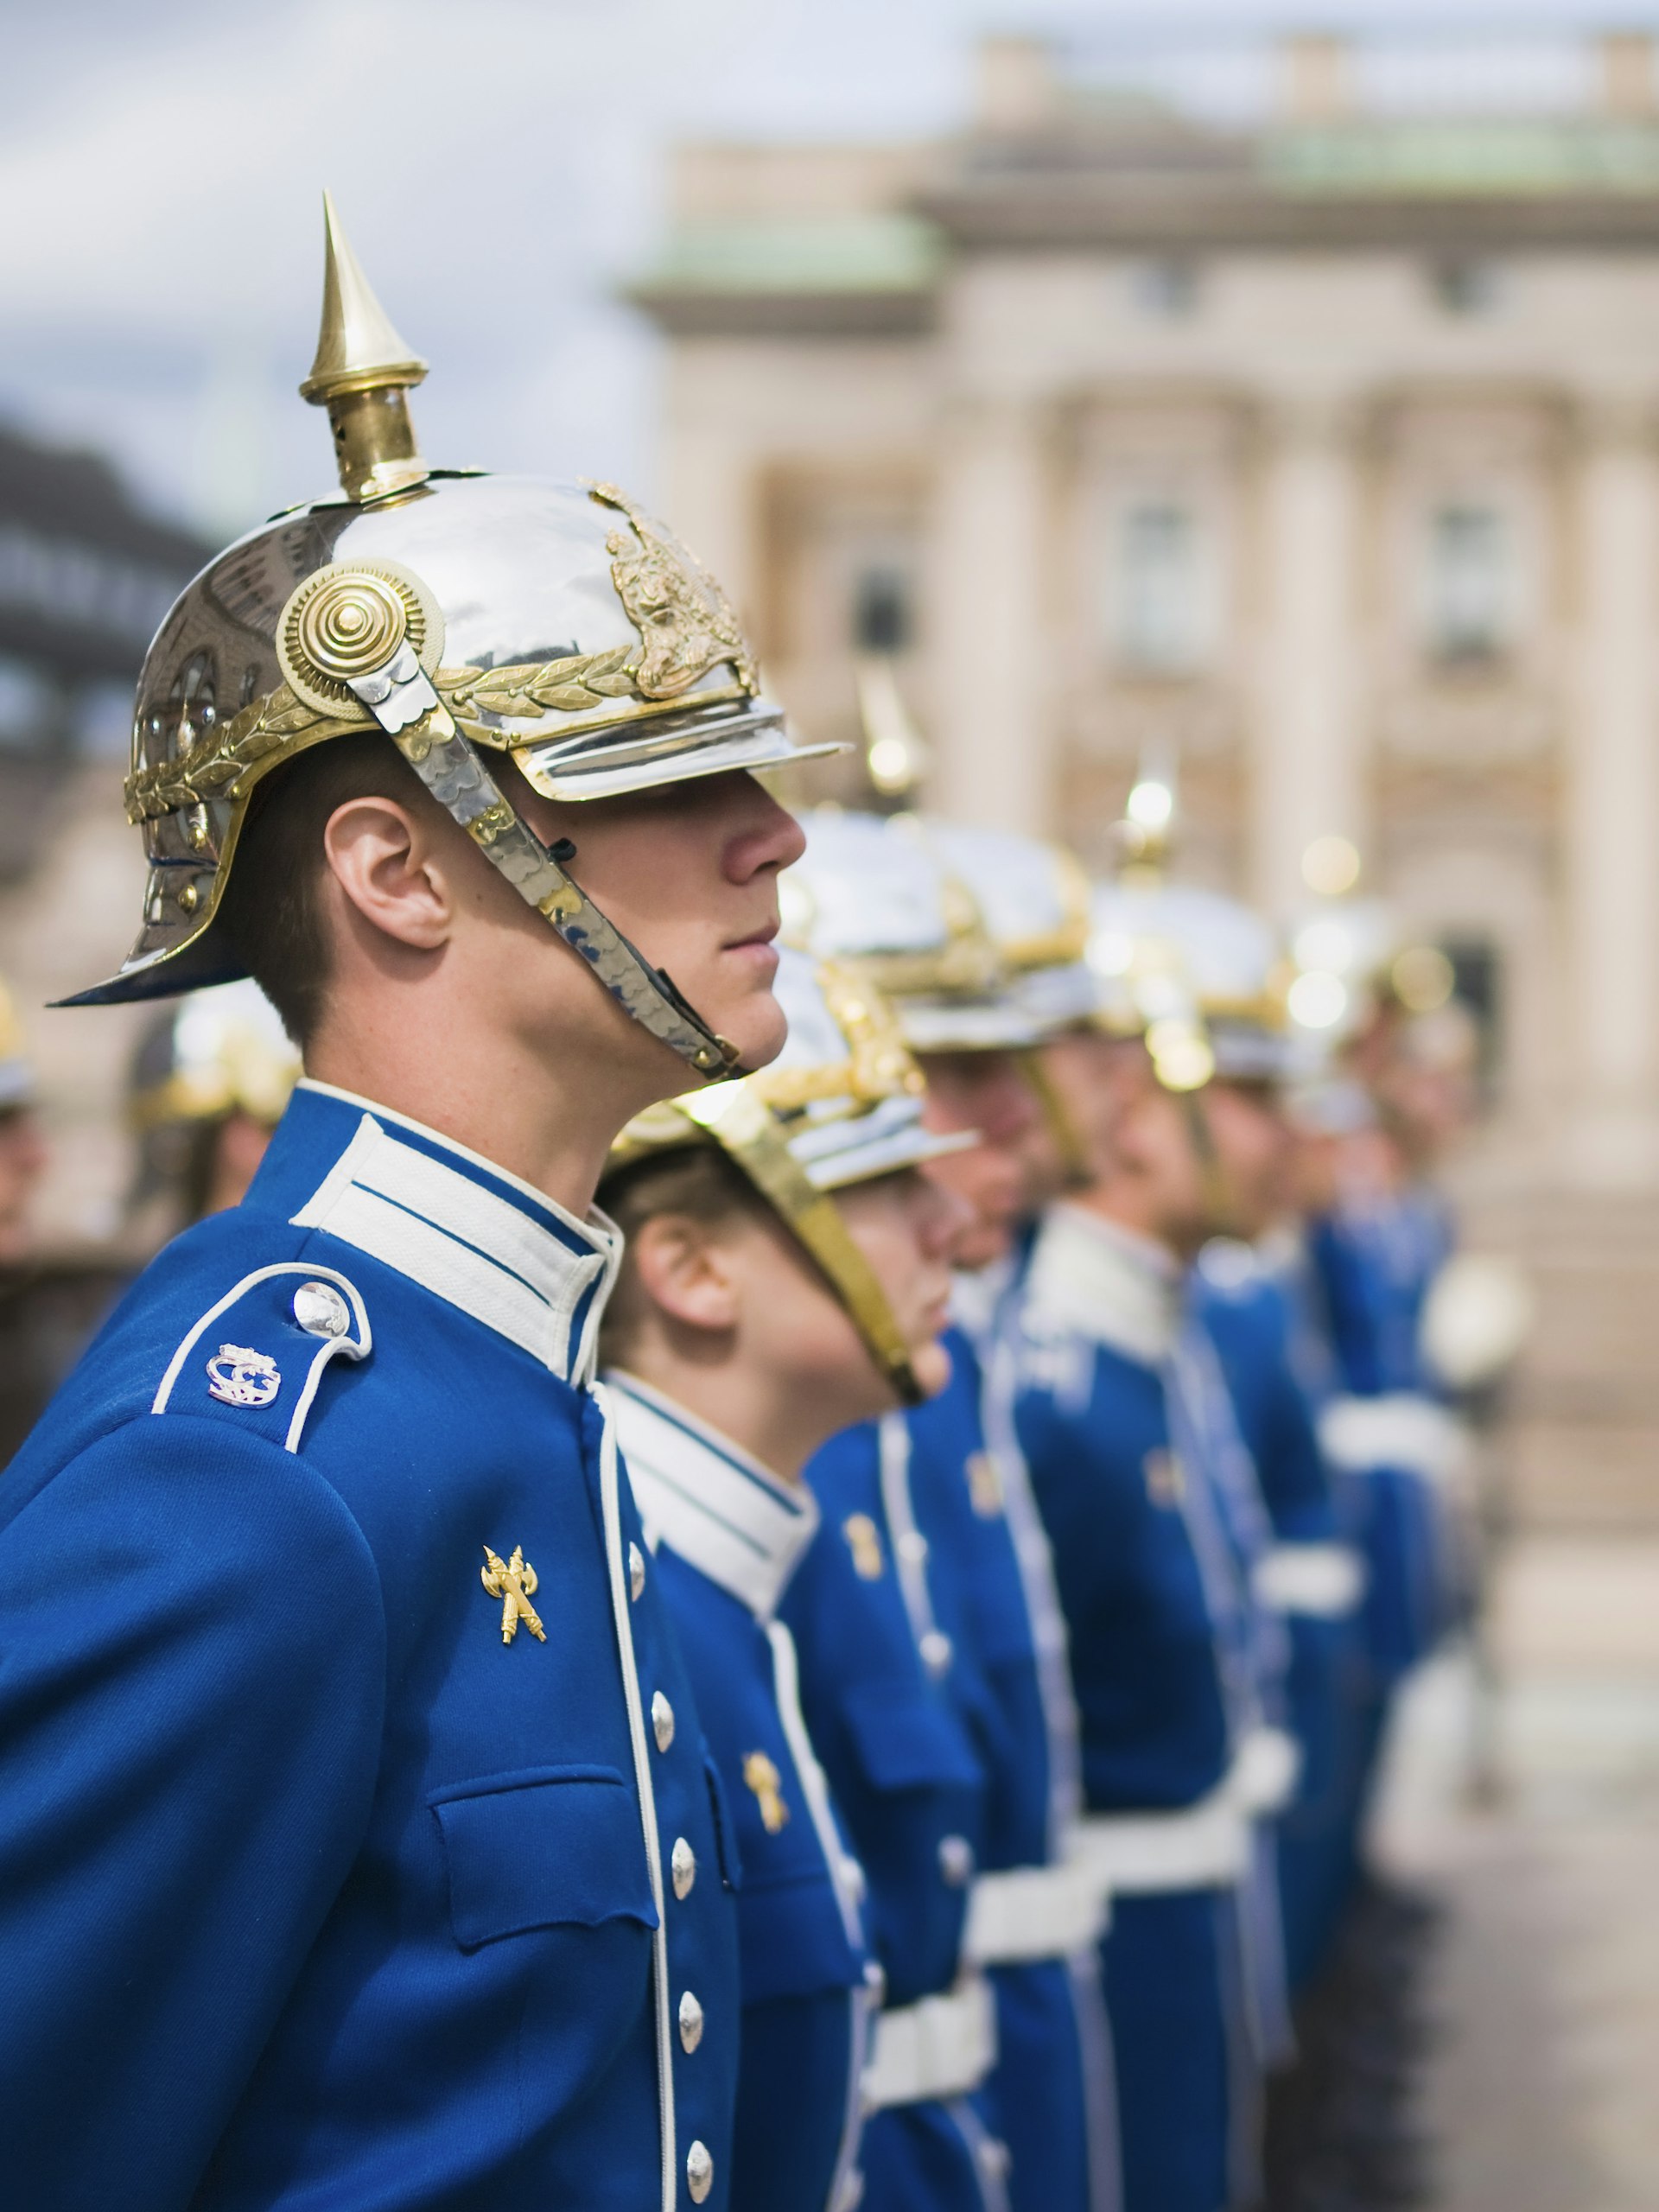 A line of guards wearing blue uniforms trimmed with gold